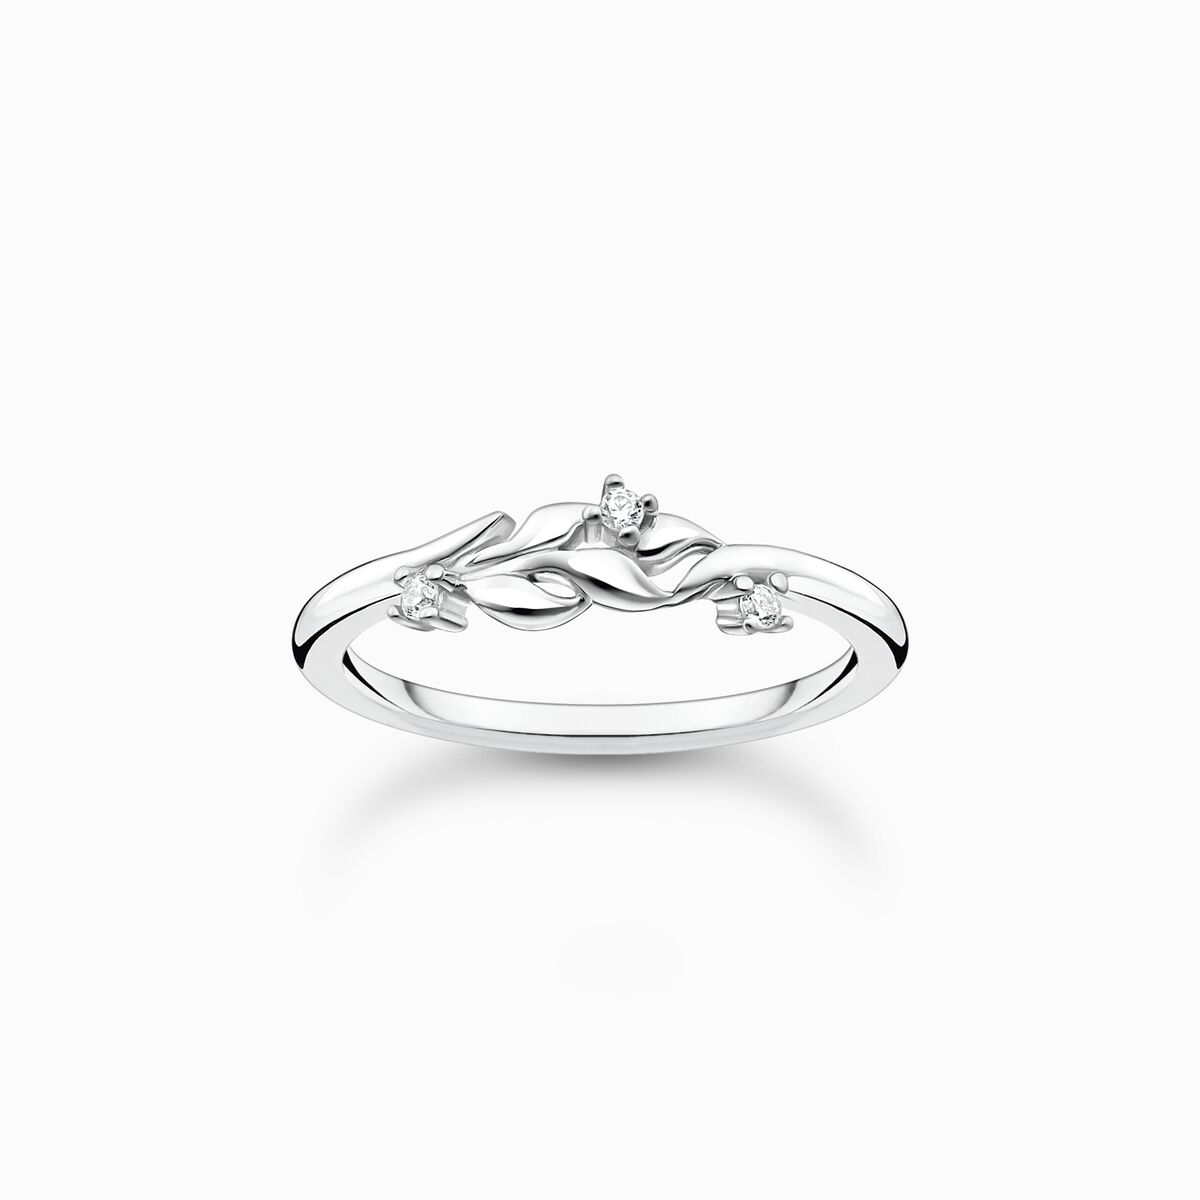 Thomas Sabo Silver Brooch with White Stones in Safety Pin Design Silver, Stainless Steel, Size: One size, for Women